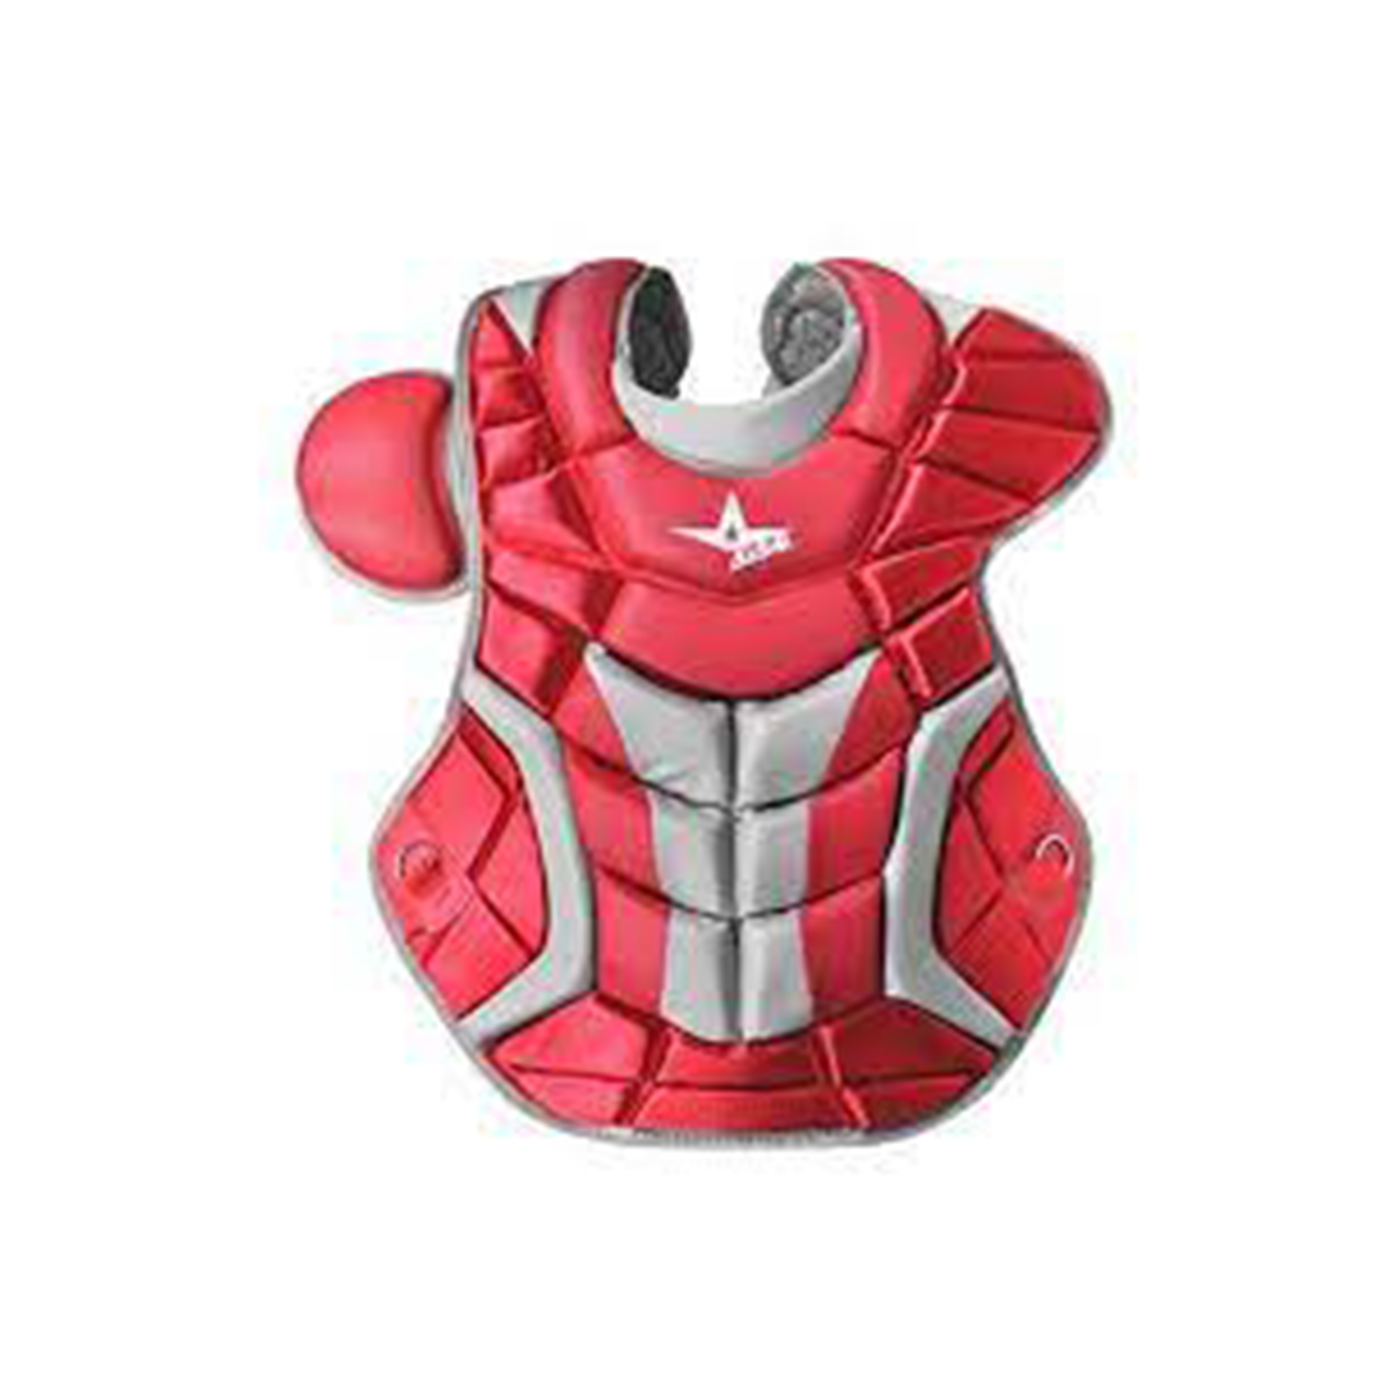 All Star Pro Chest Protector Adult